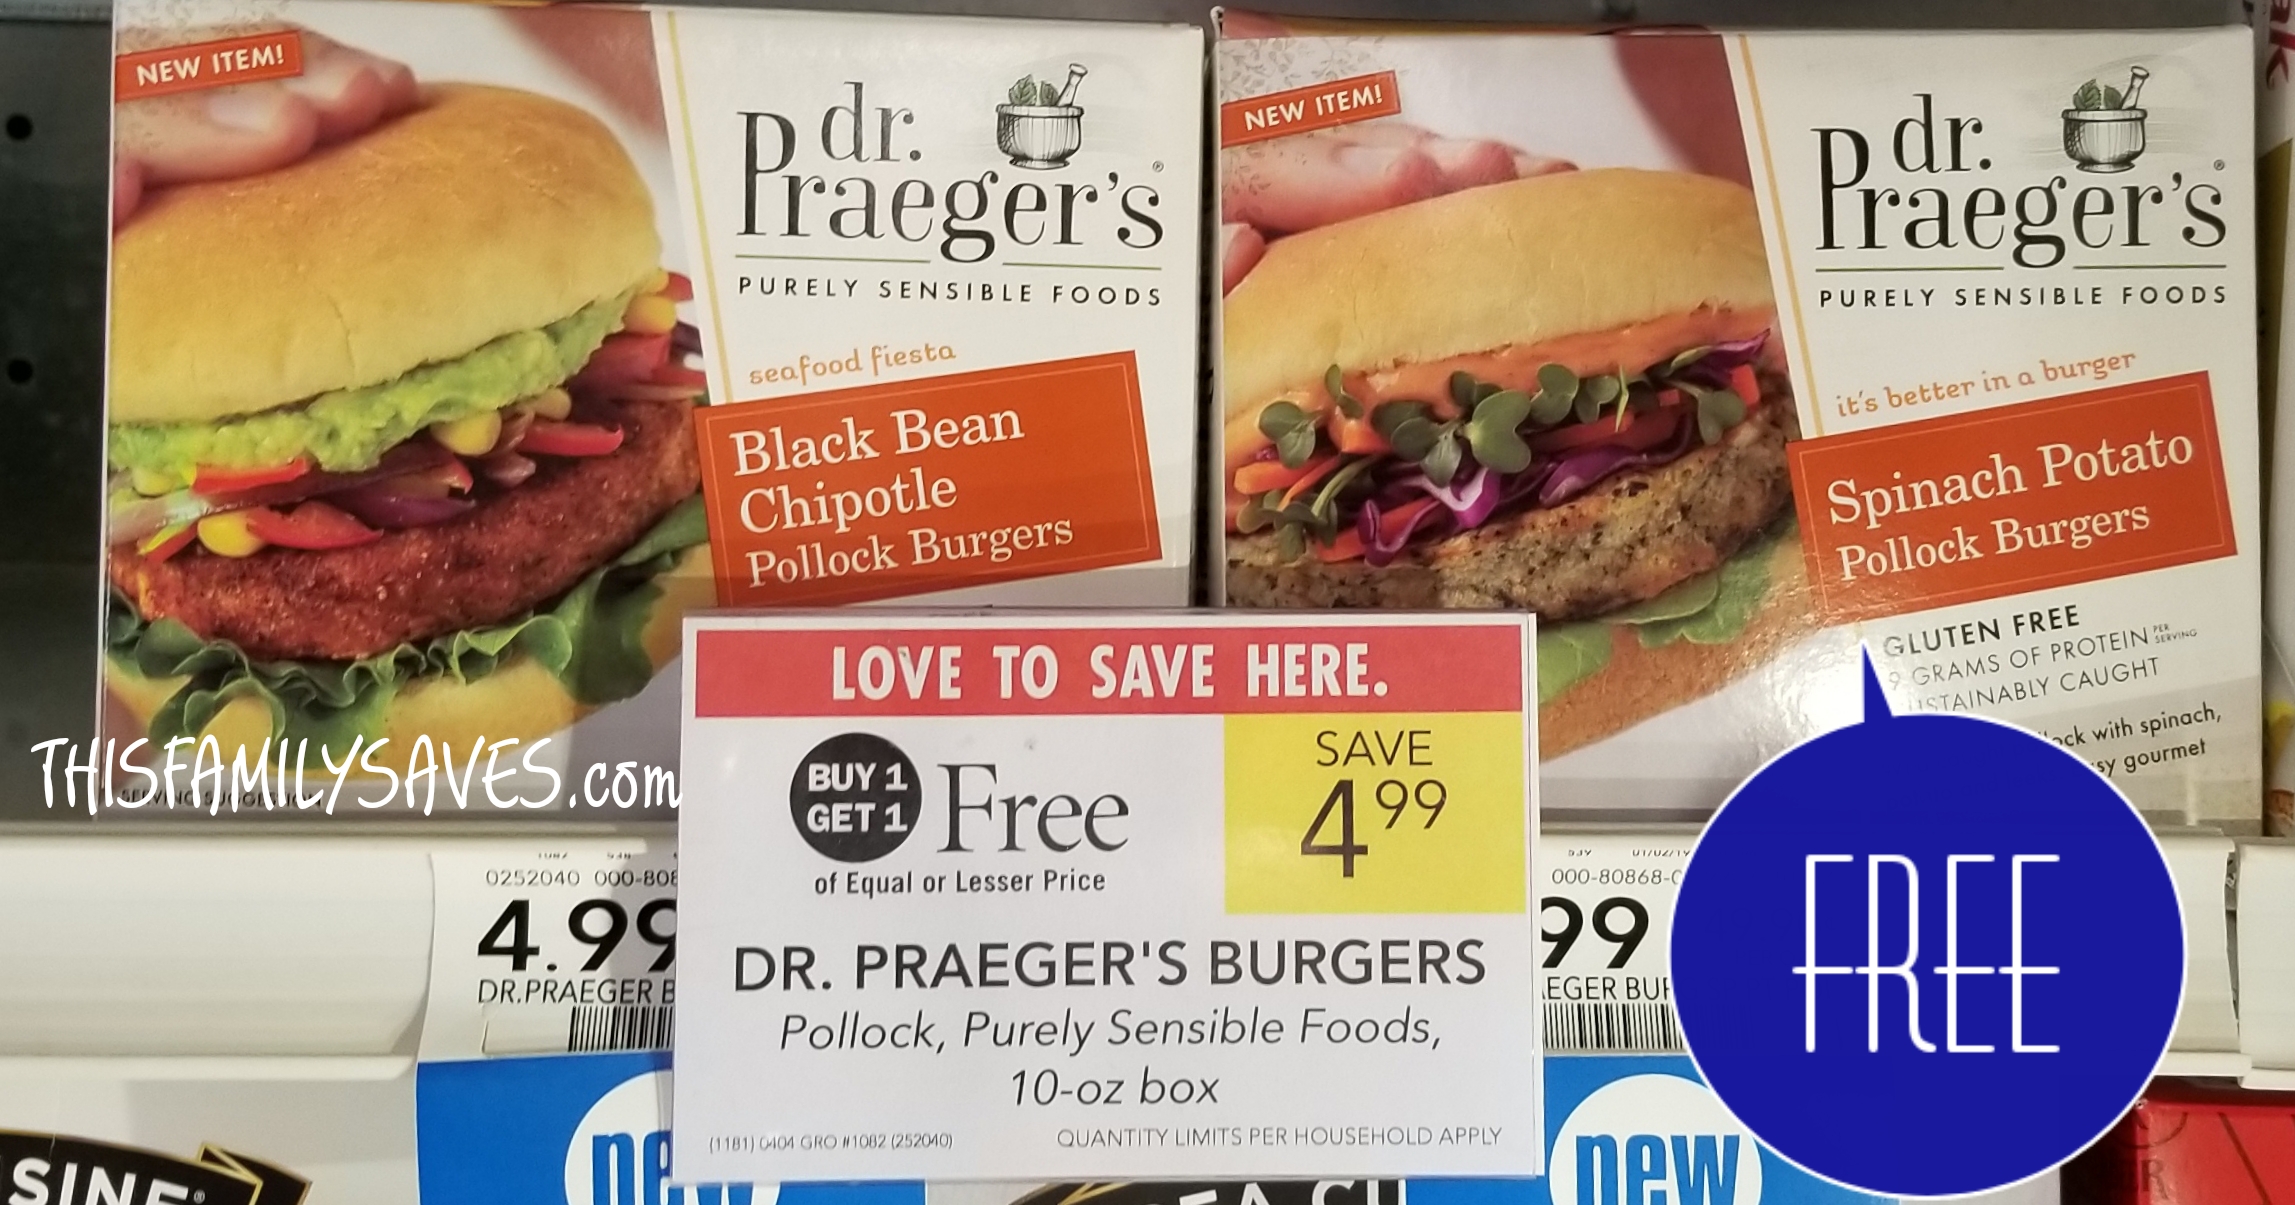 Dr. Praeger’s Purely Sensible Foods As Low as FREE